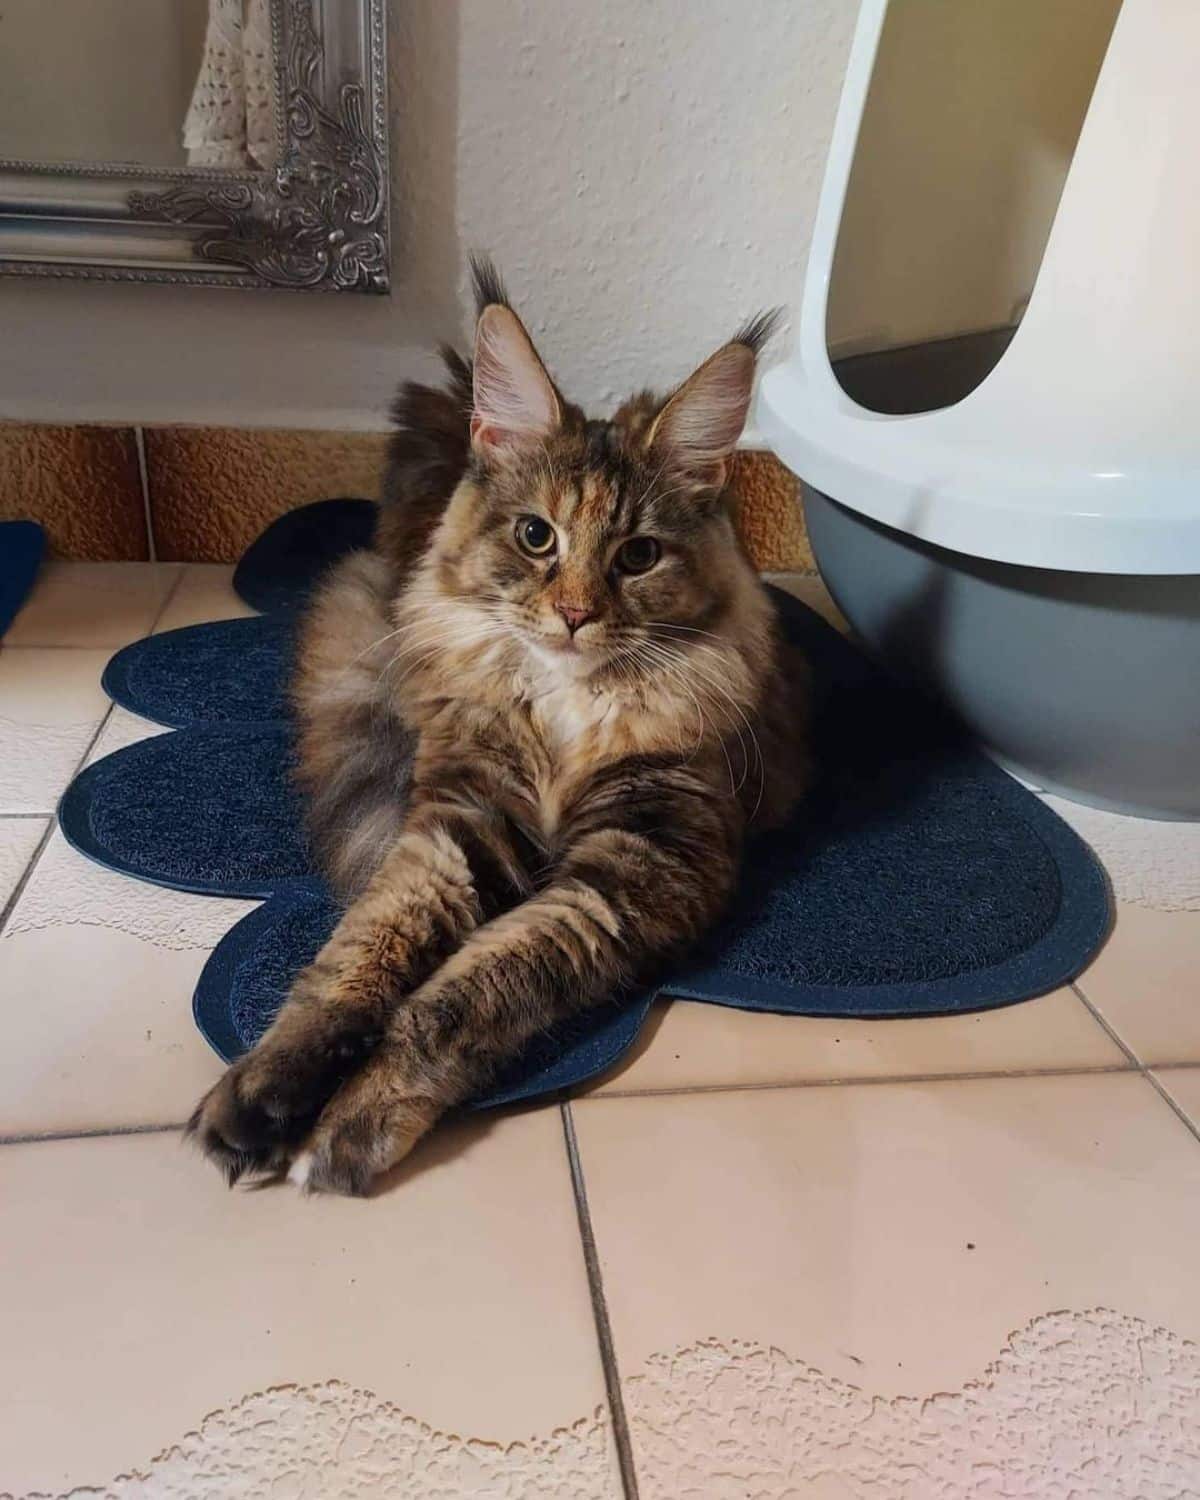 A tabby maine coon lying on a floor next to a litter box.